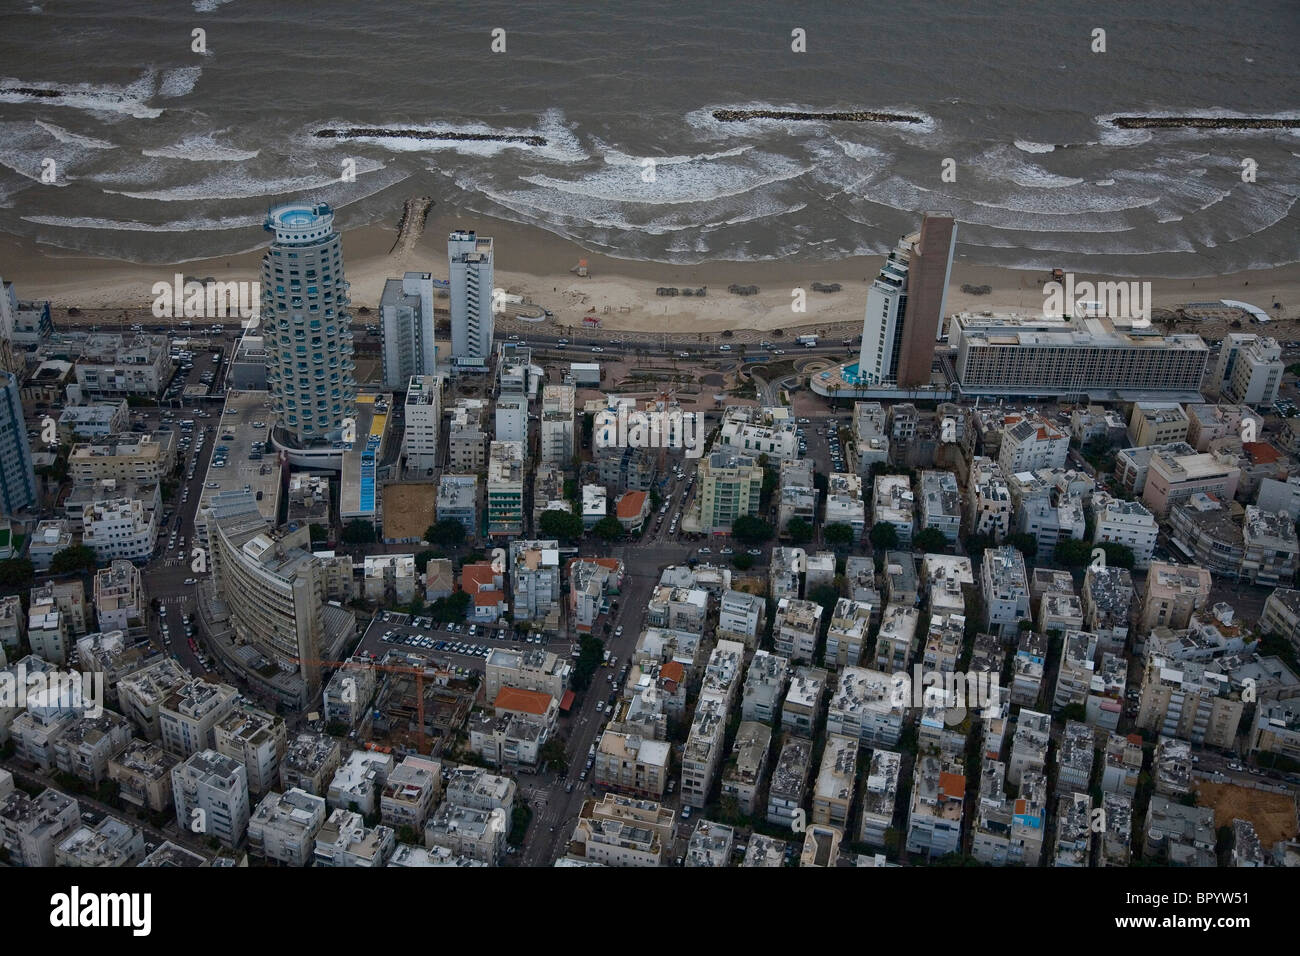 Aerial photograph of the Tel Aviv's coastline after a storm Stock Photo